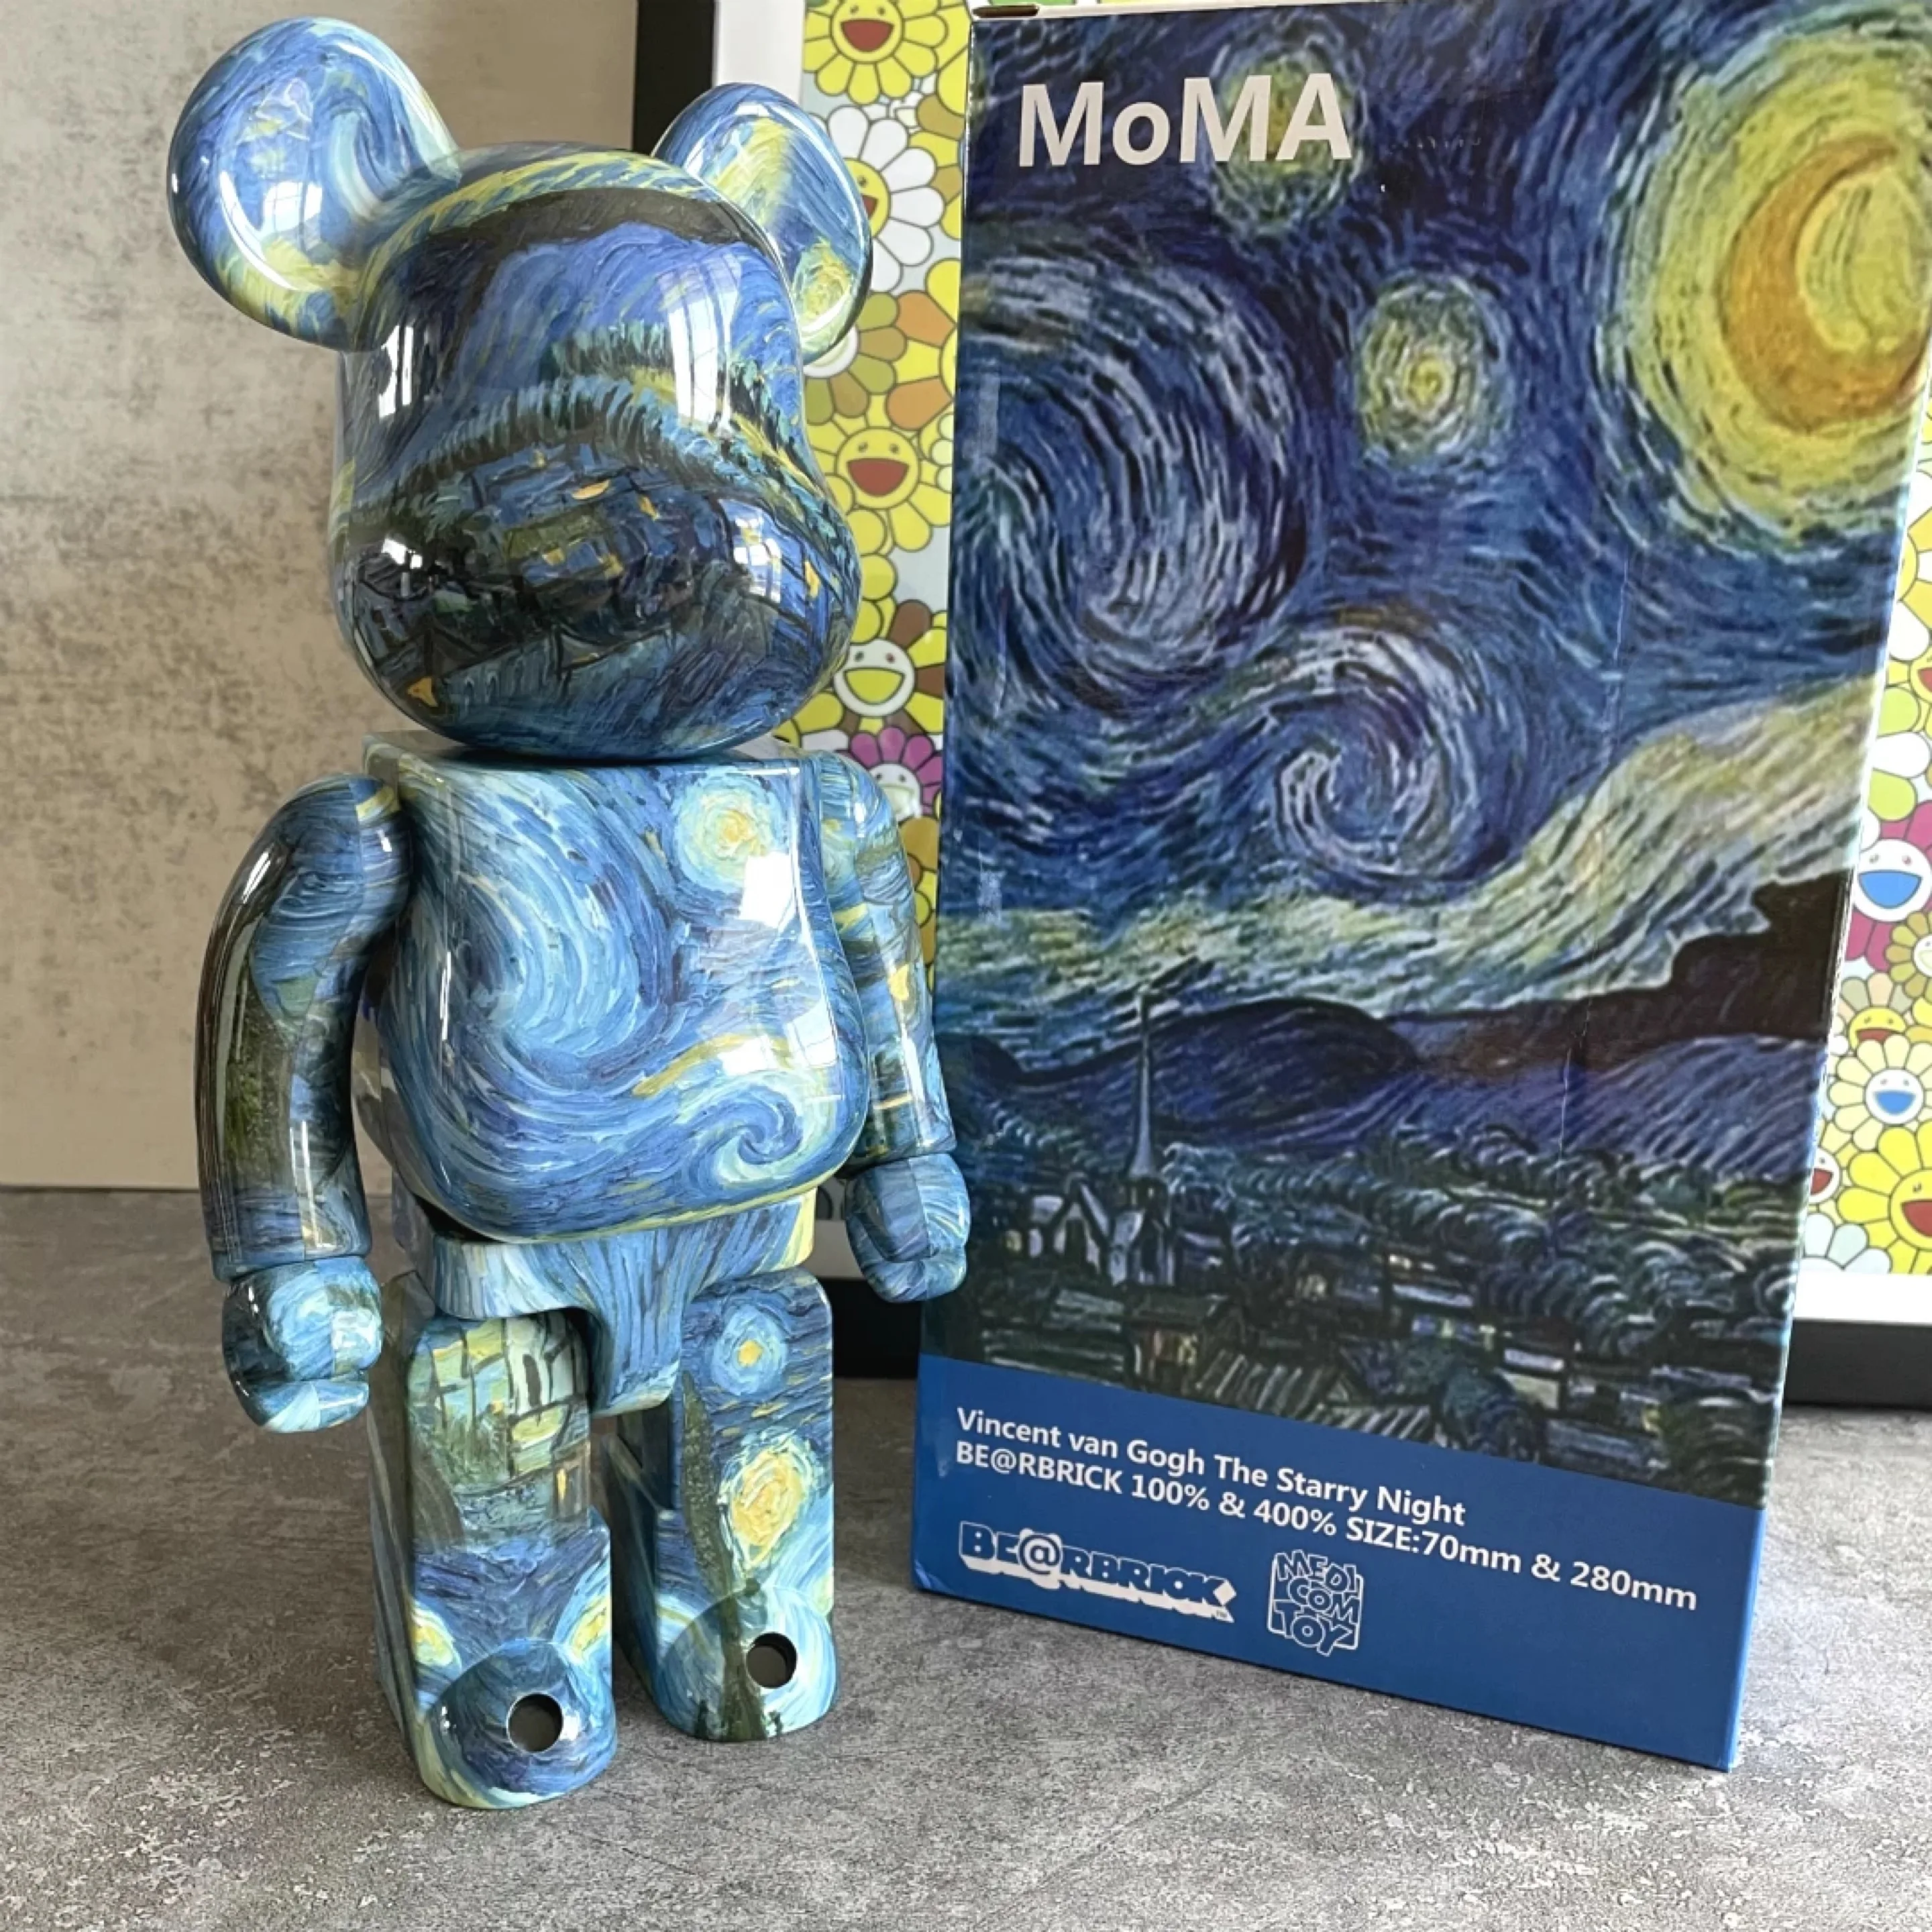 28cm Be@rbricklys 400% Bearbrick Toy Starry Night Van Gogh 400% Bear  Collection Model Toy Present GIft Art Toy